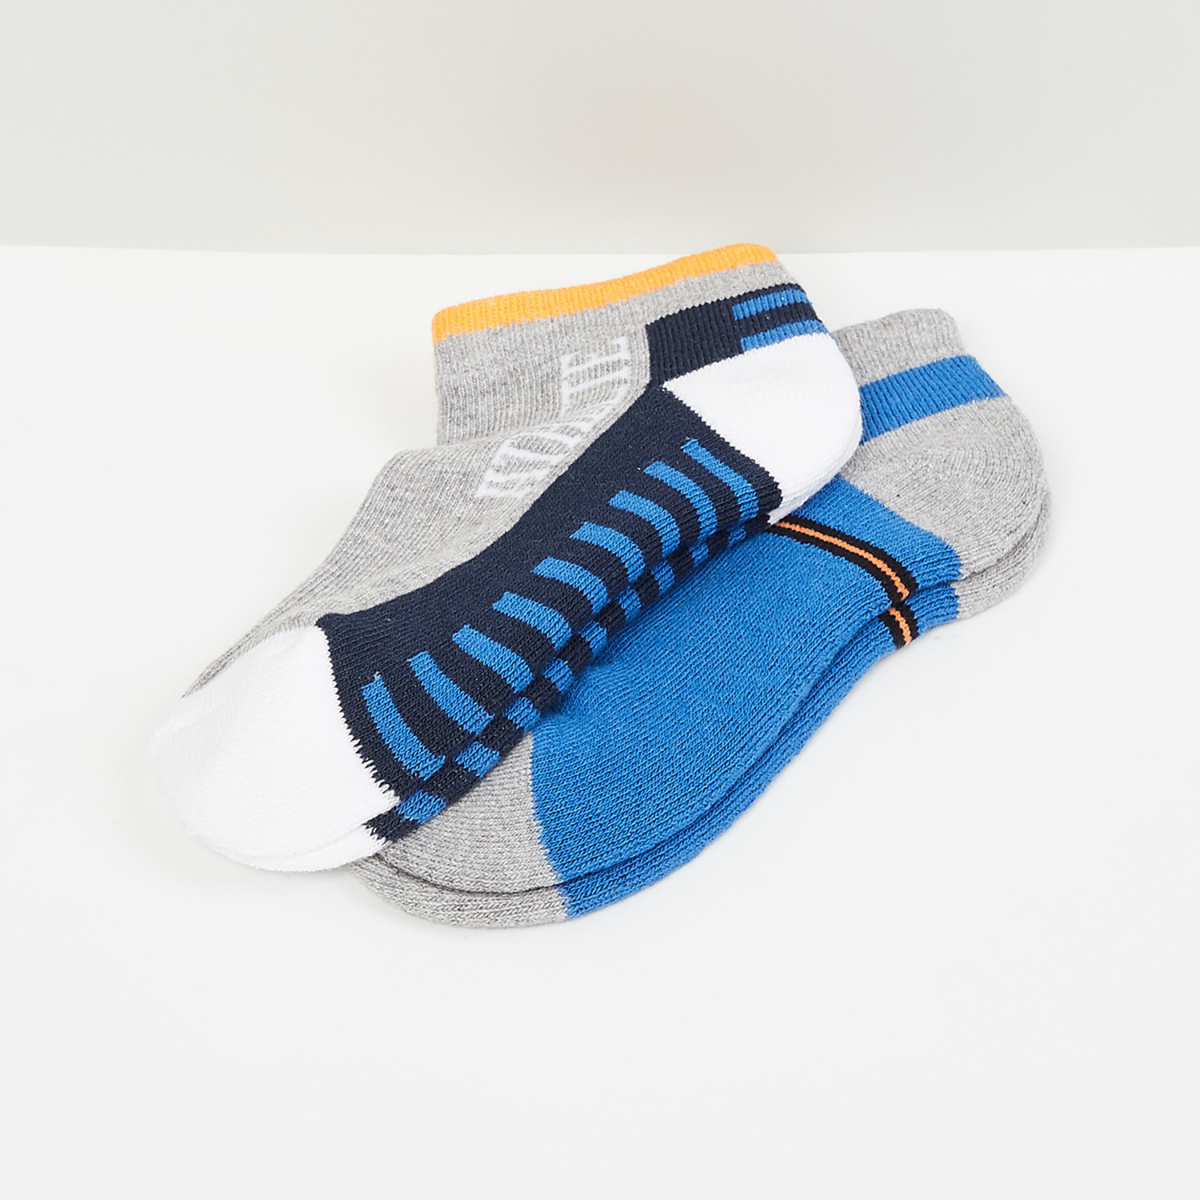 MAX Textured Knit Socks - Pack of 2